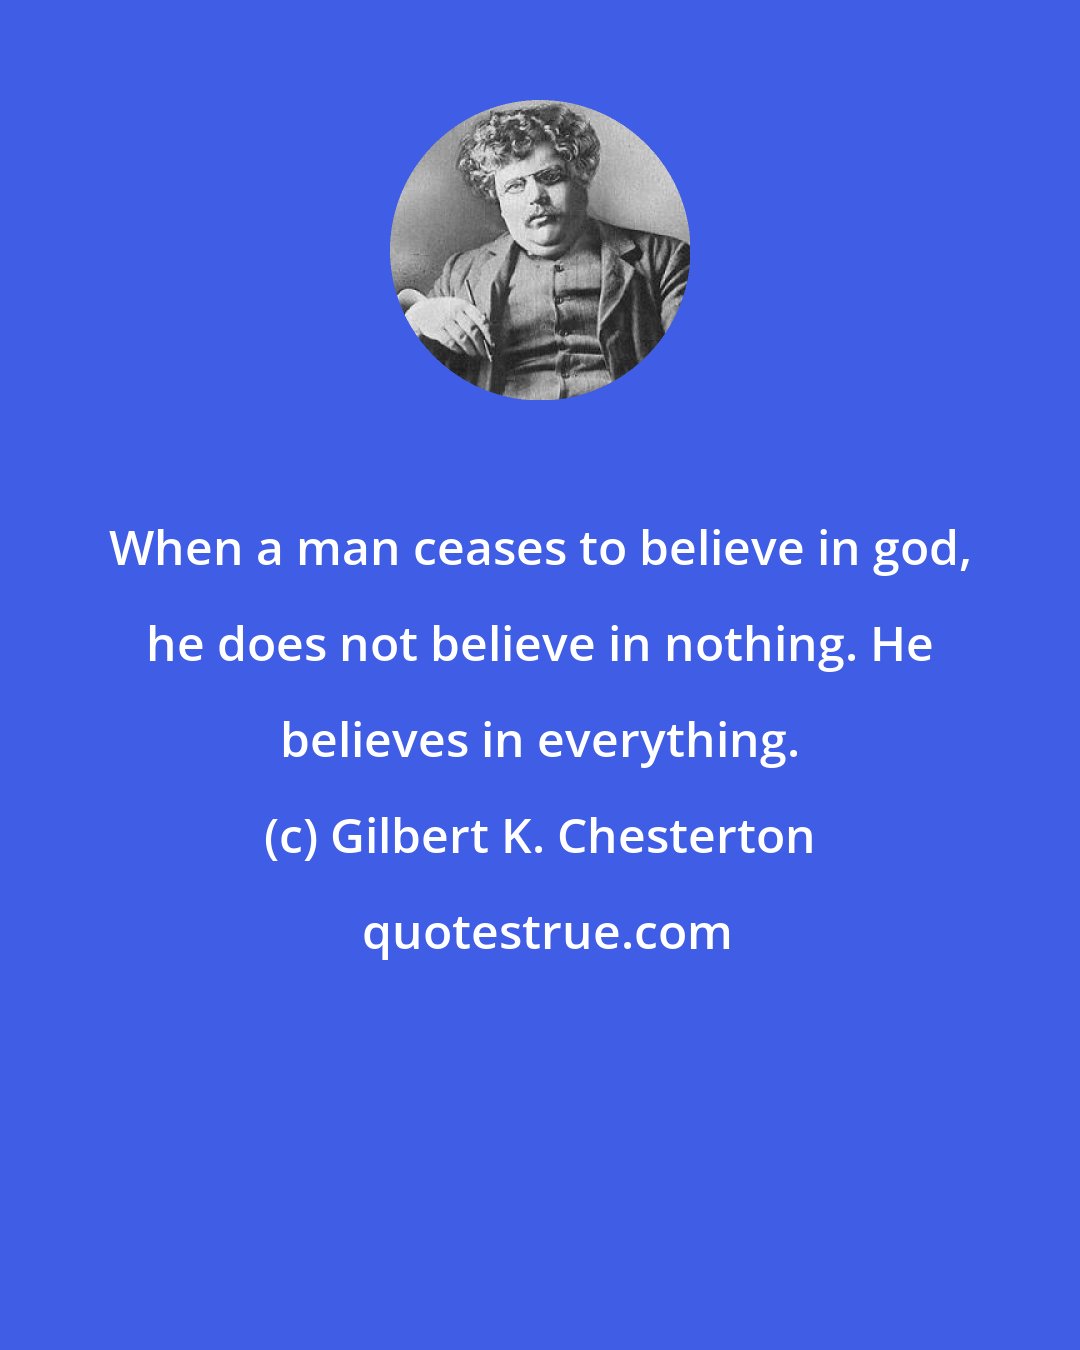 Gilbert K. Chesterton: When a man ceases to believe in god, he does not believe in nothing. He believes in everything.